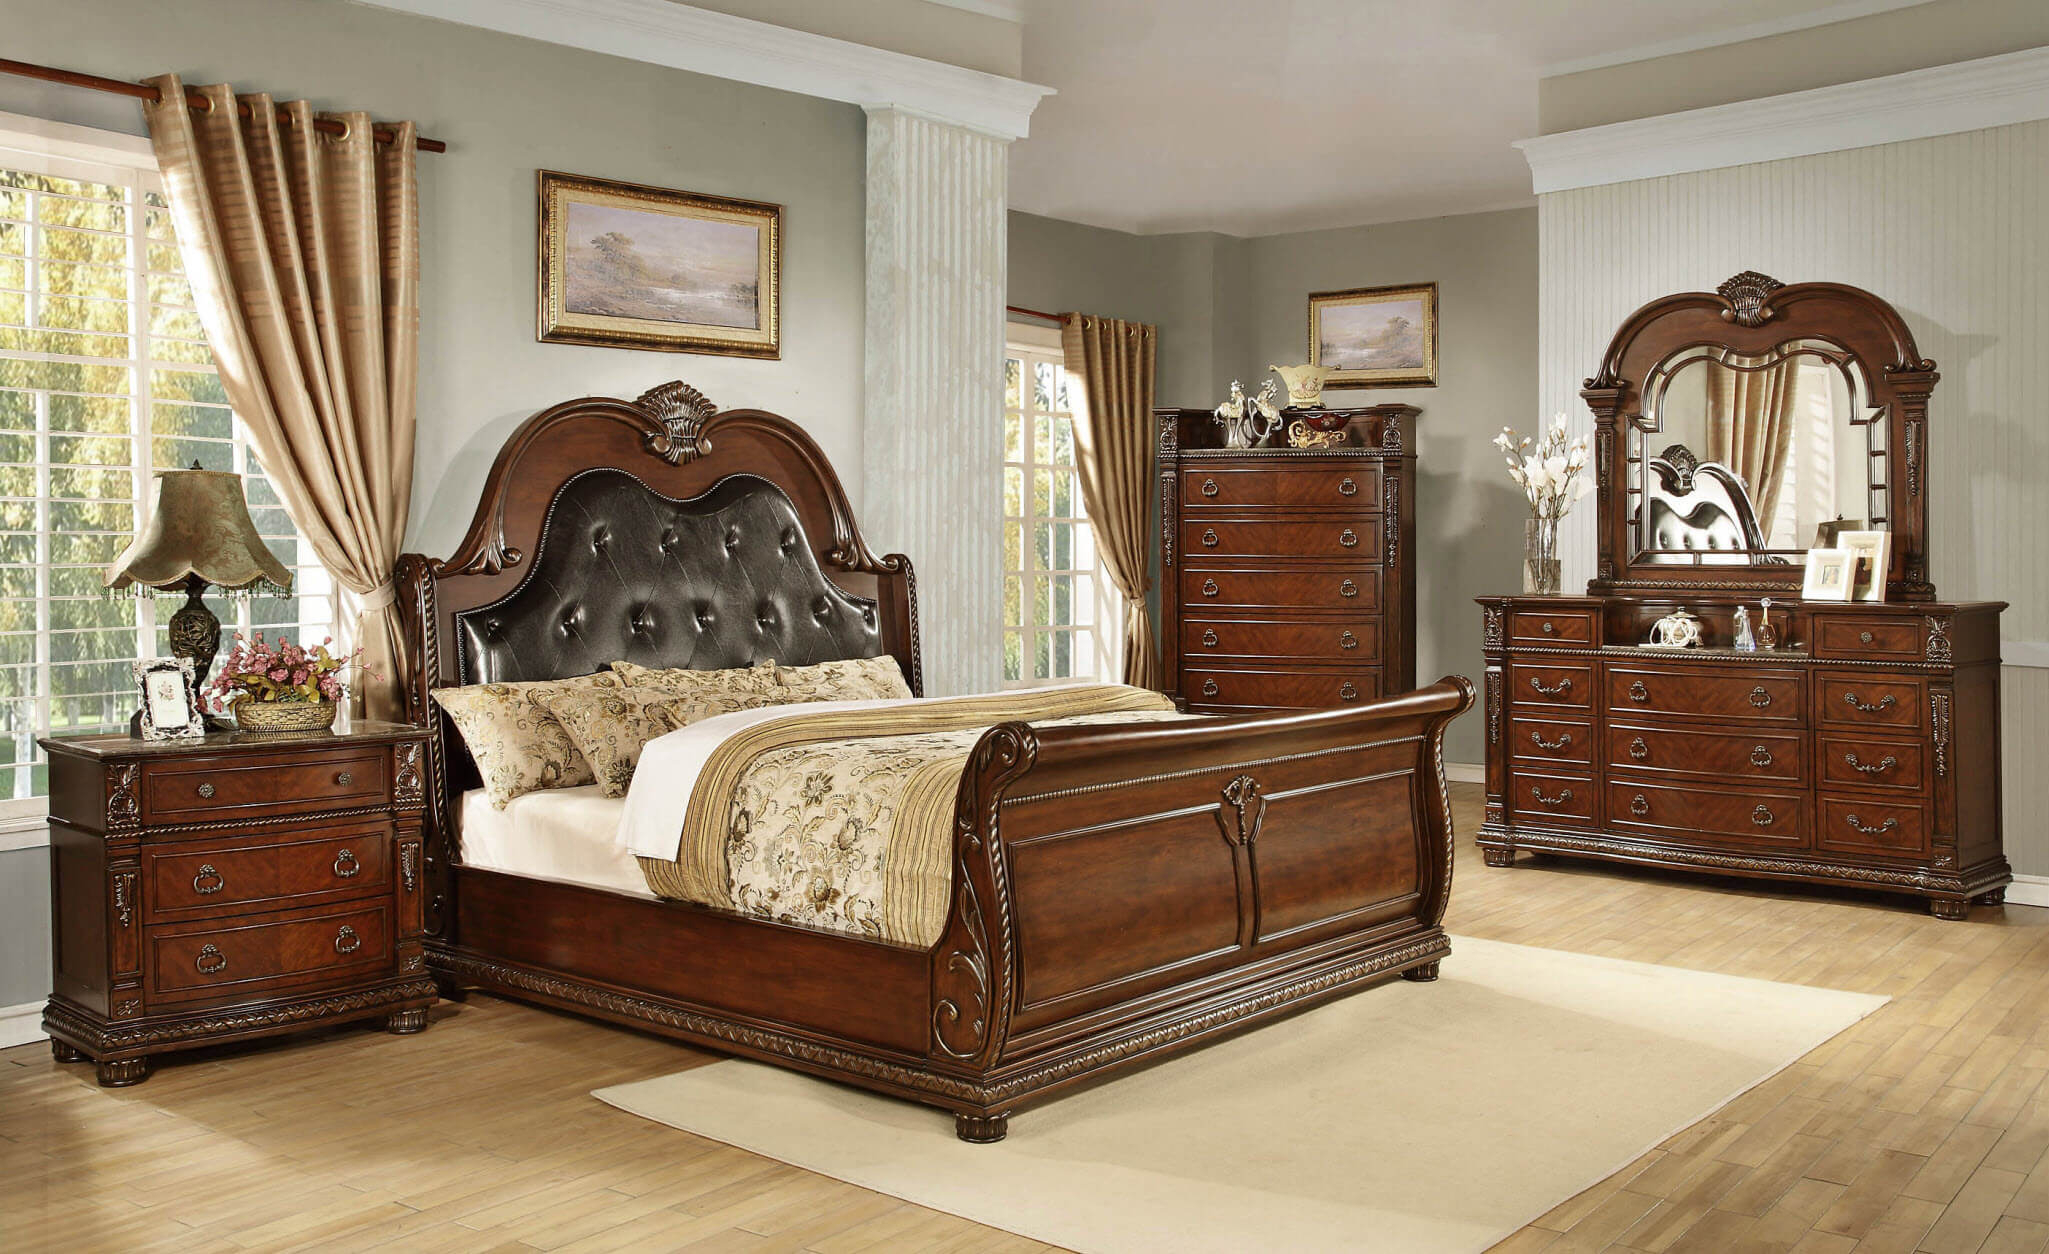 B718 Palace Marble Top Bedroom Set Global Trading throughout size 2049 X 1254